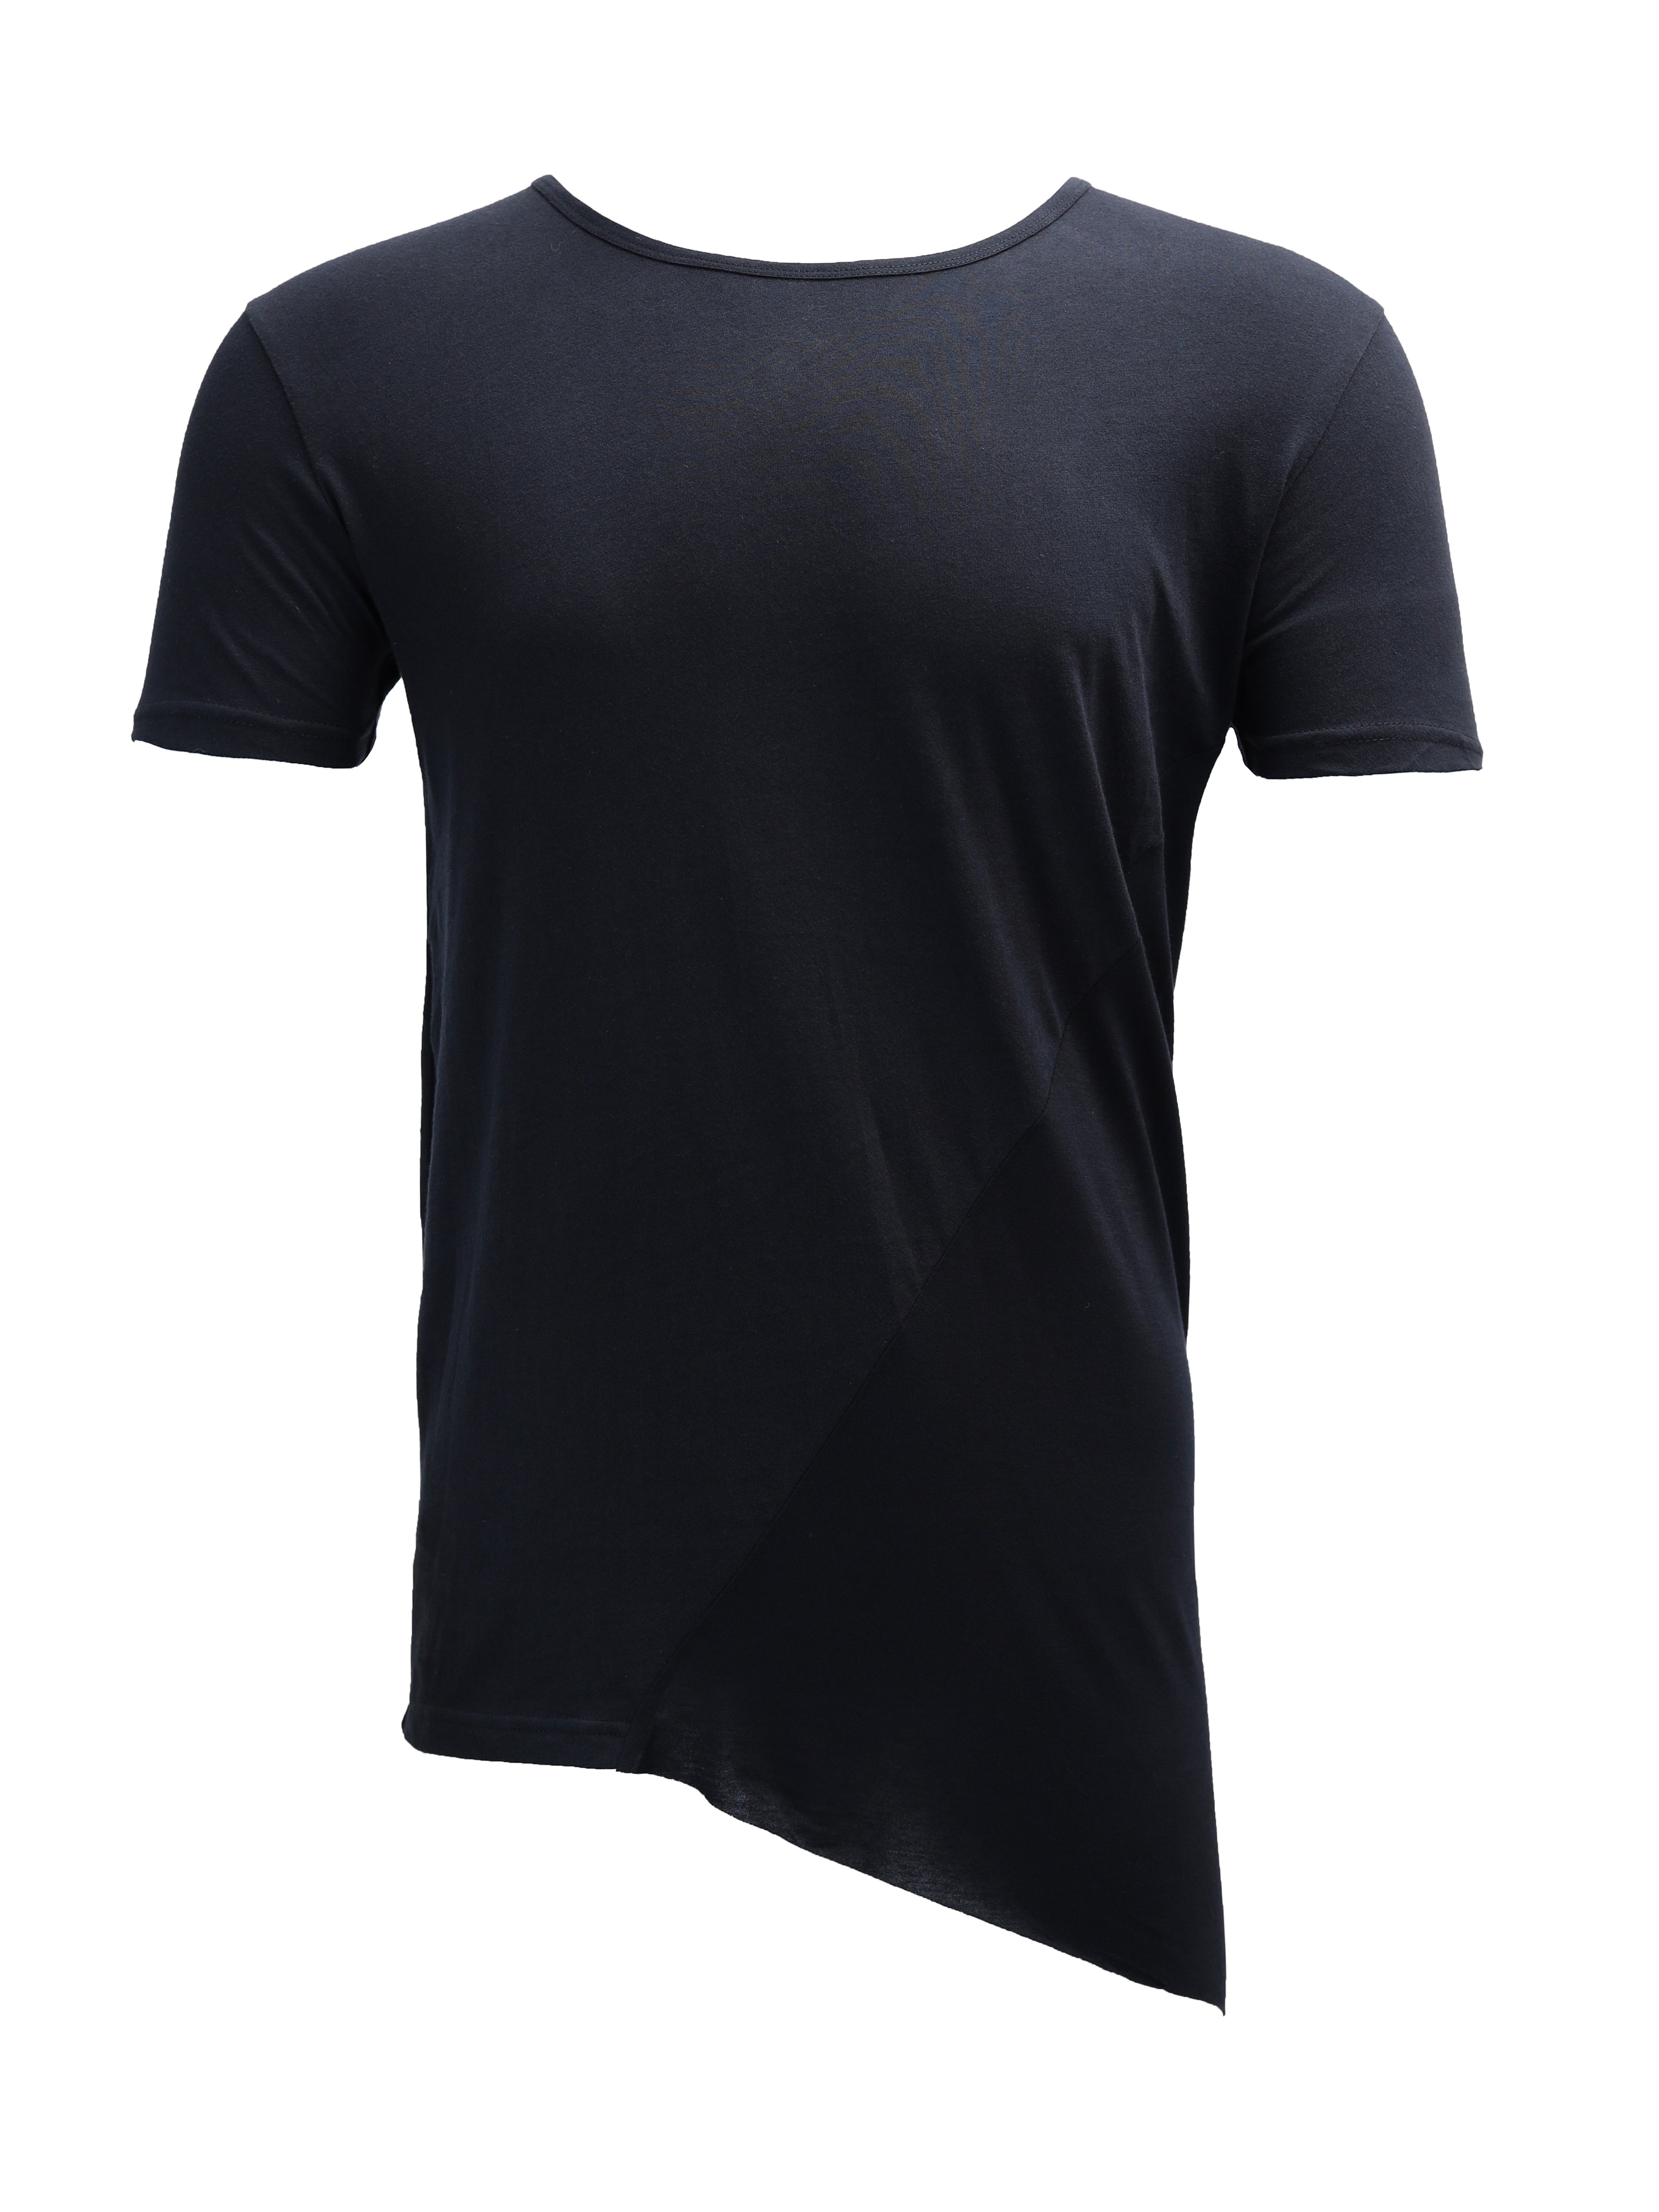 ASYMMETRIC RAYON AND COTTON T-SHIRT IN BLACK